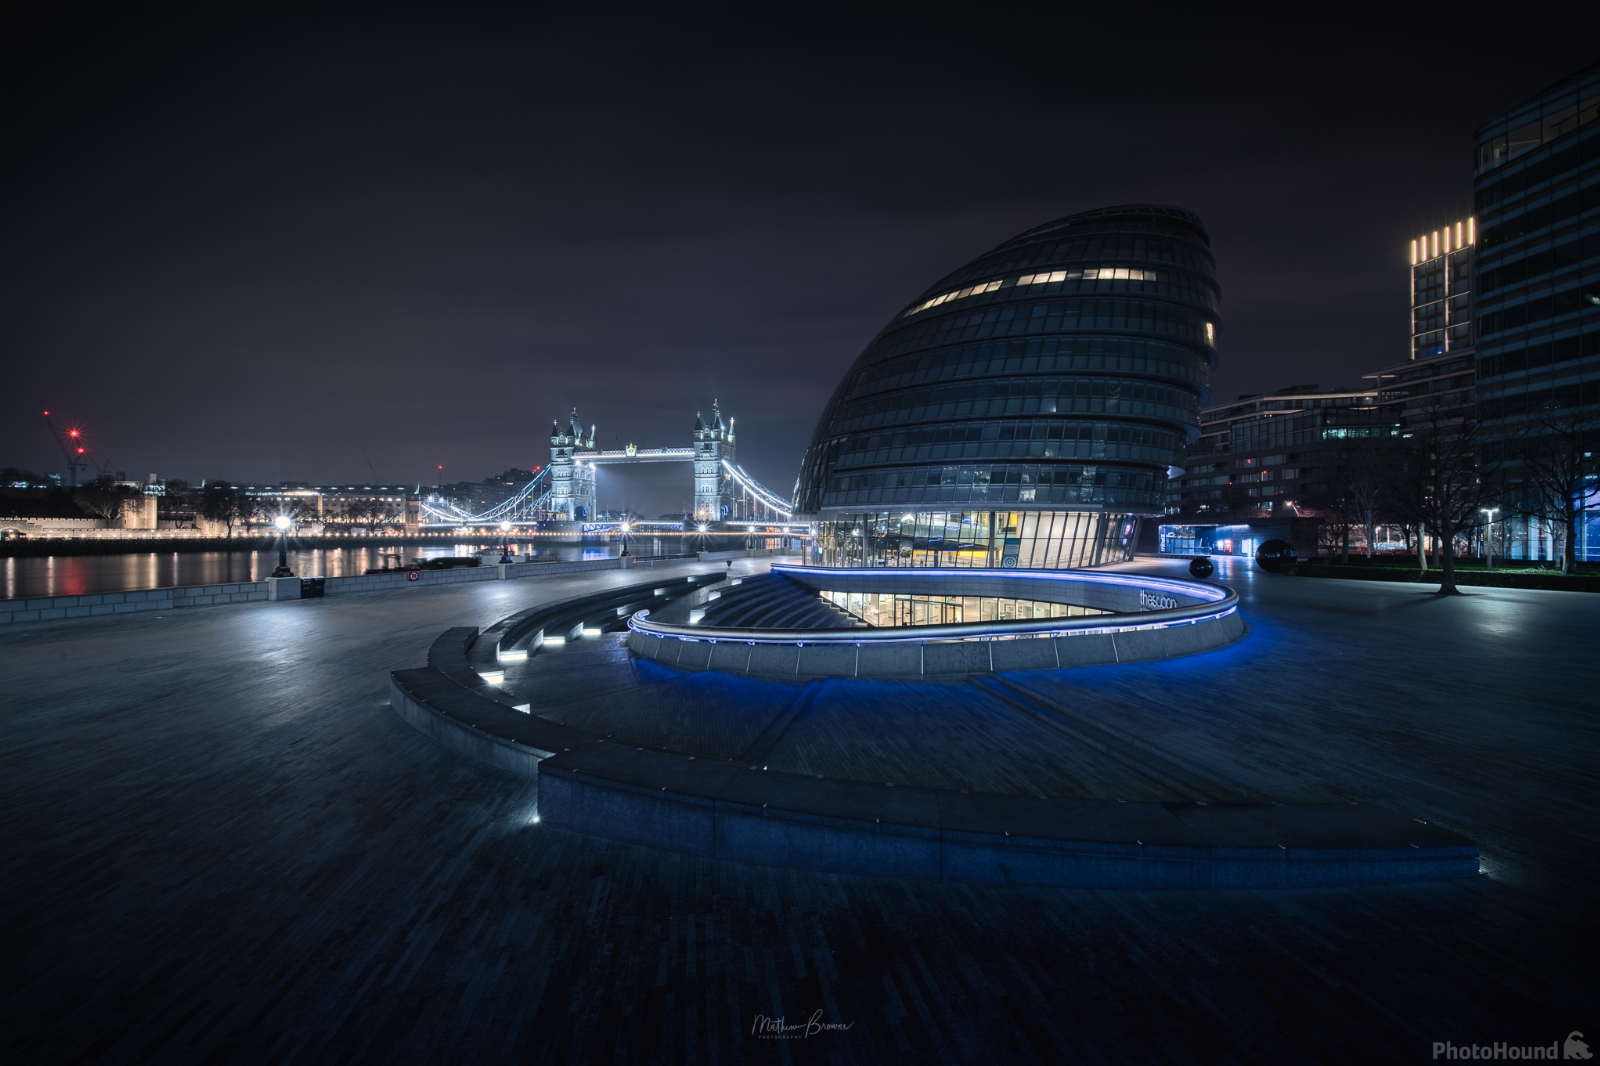 Image of More London by Mathew Browne